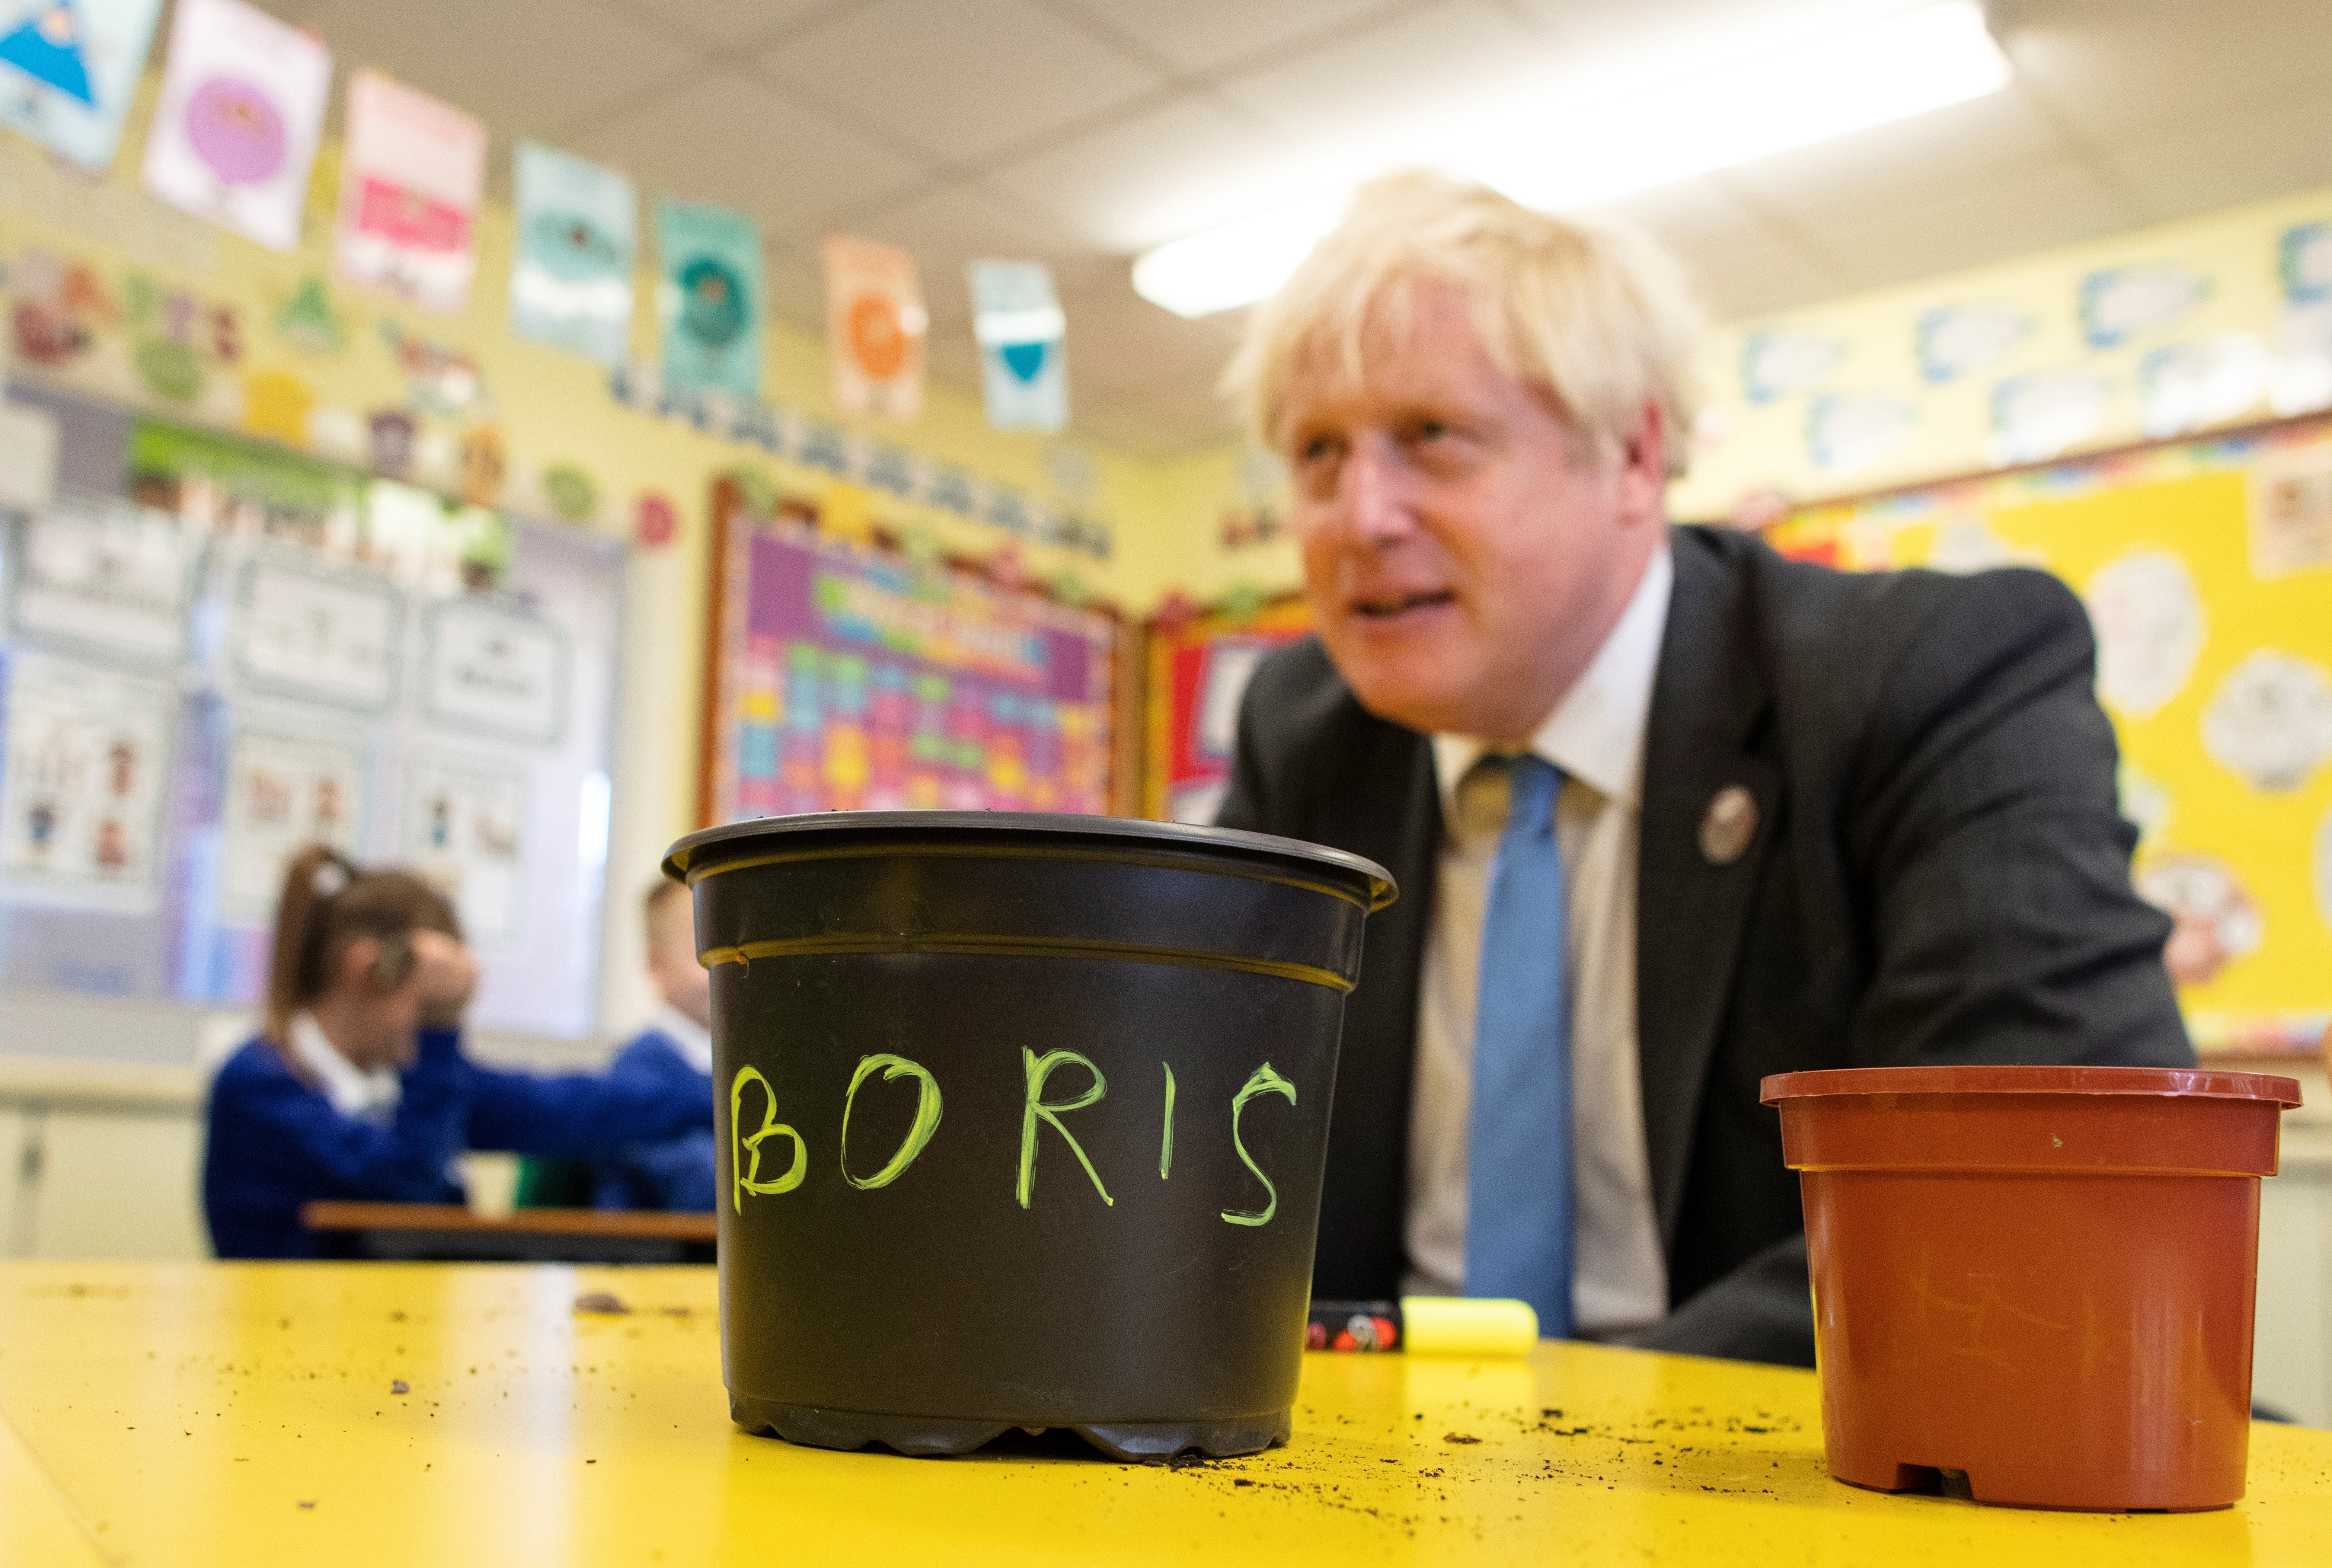 Boris Johnson with schoolchildren at the Crumlin integrated primary school in County Antrim, Northern Ireland in October 2021 (Paul Faith/PA)